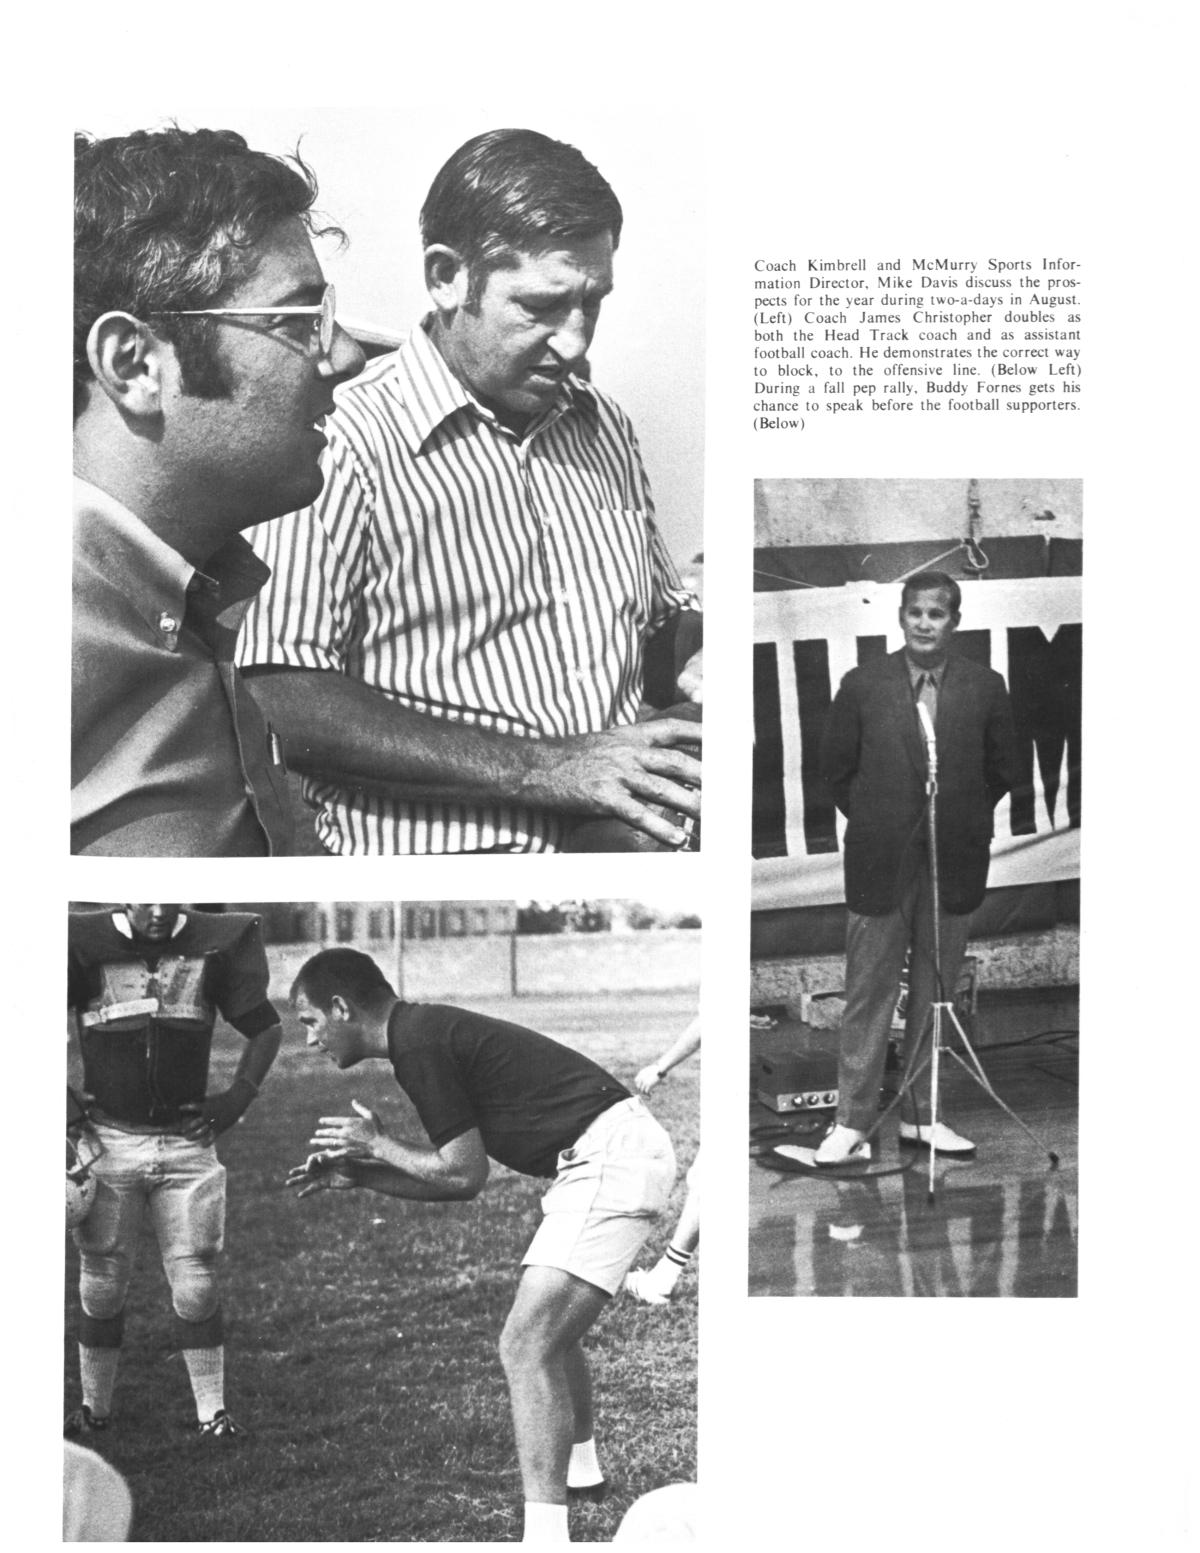 The Totem, Yearbook of McMurry College, 1972
                                                
                                                    87
                                                